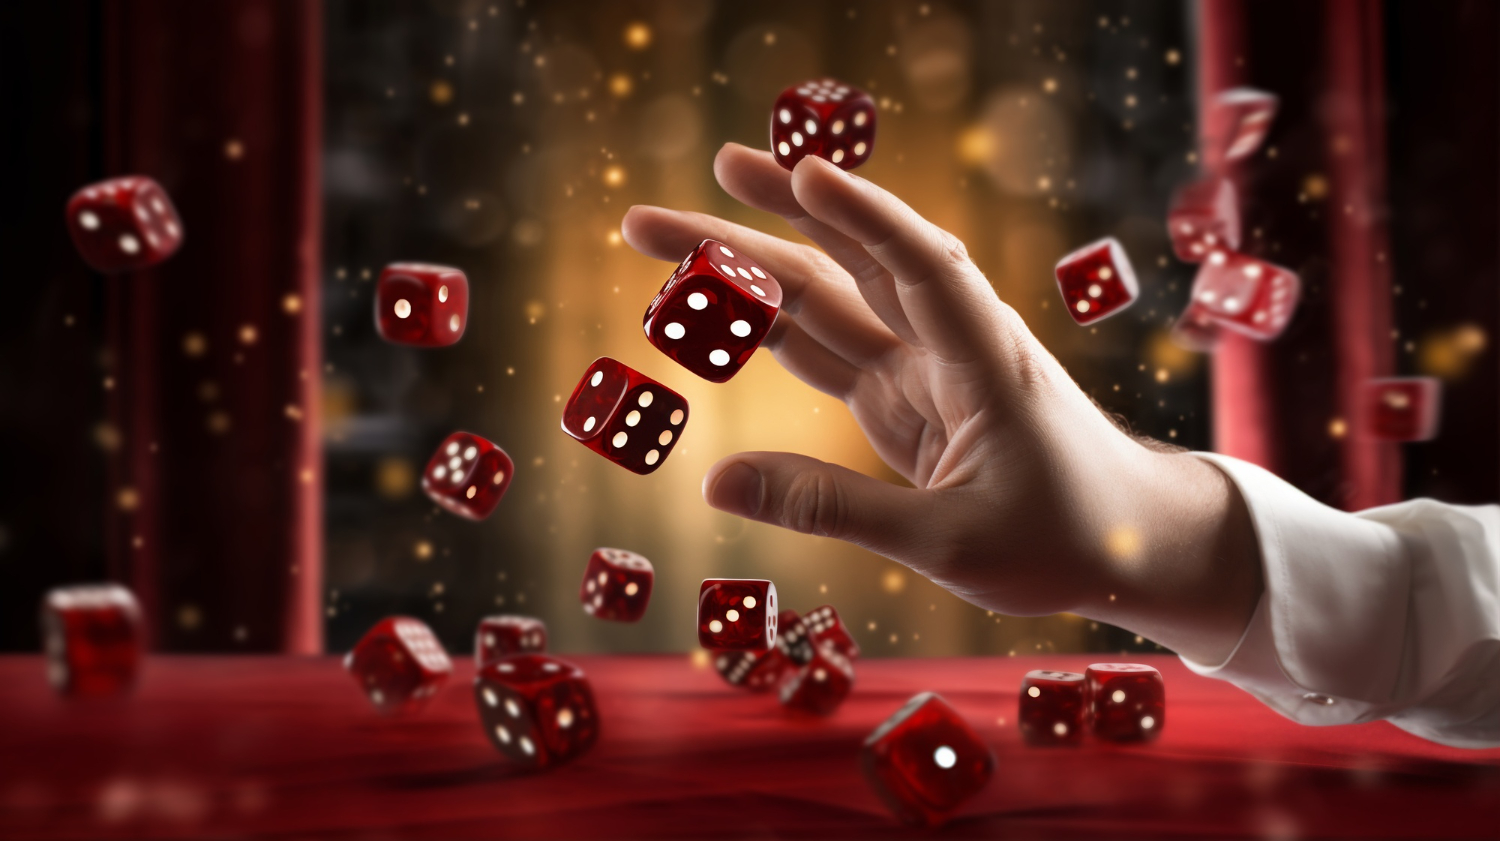 Abstract 3d dice with human hand | Image by freepik